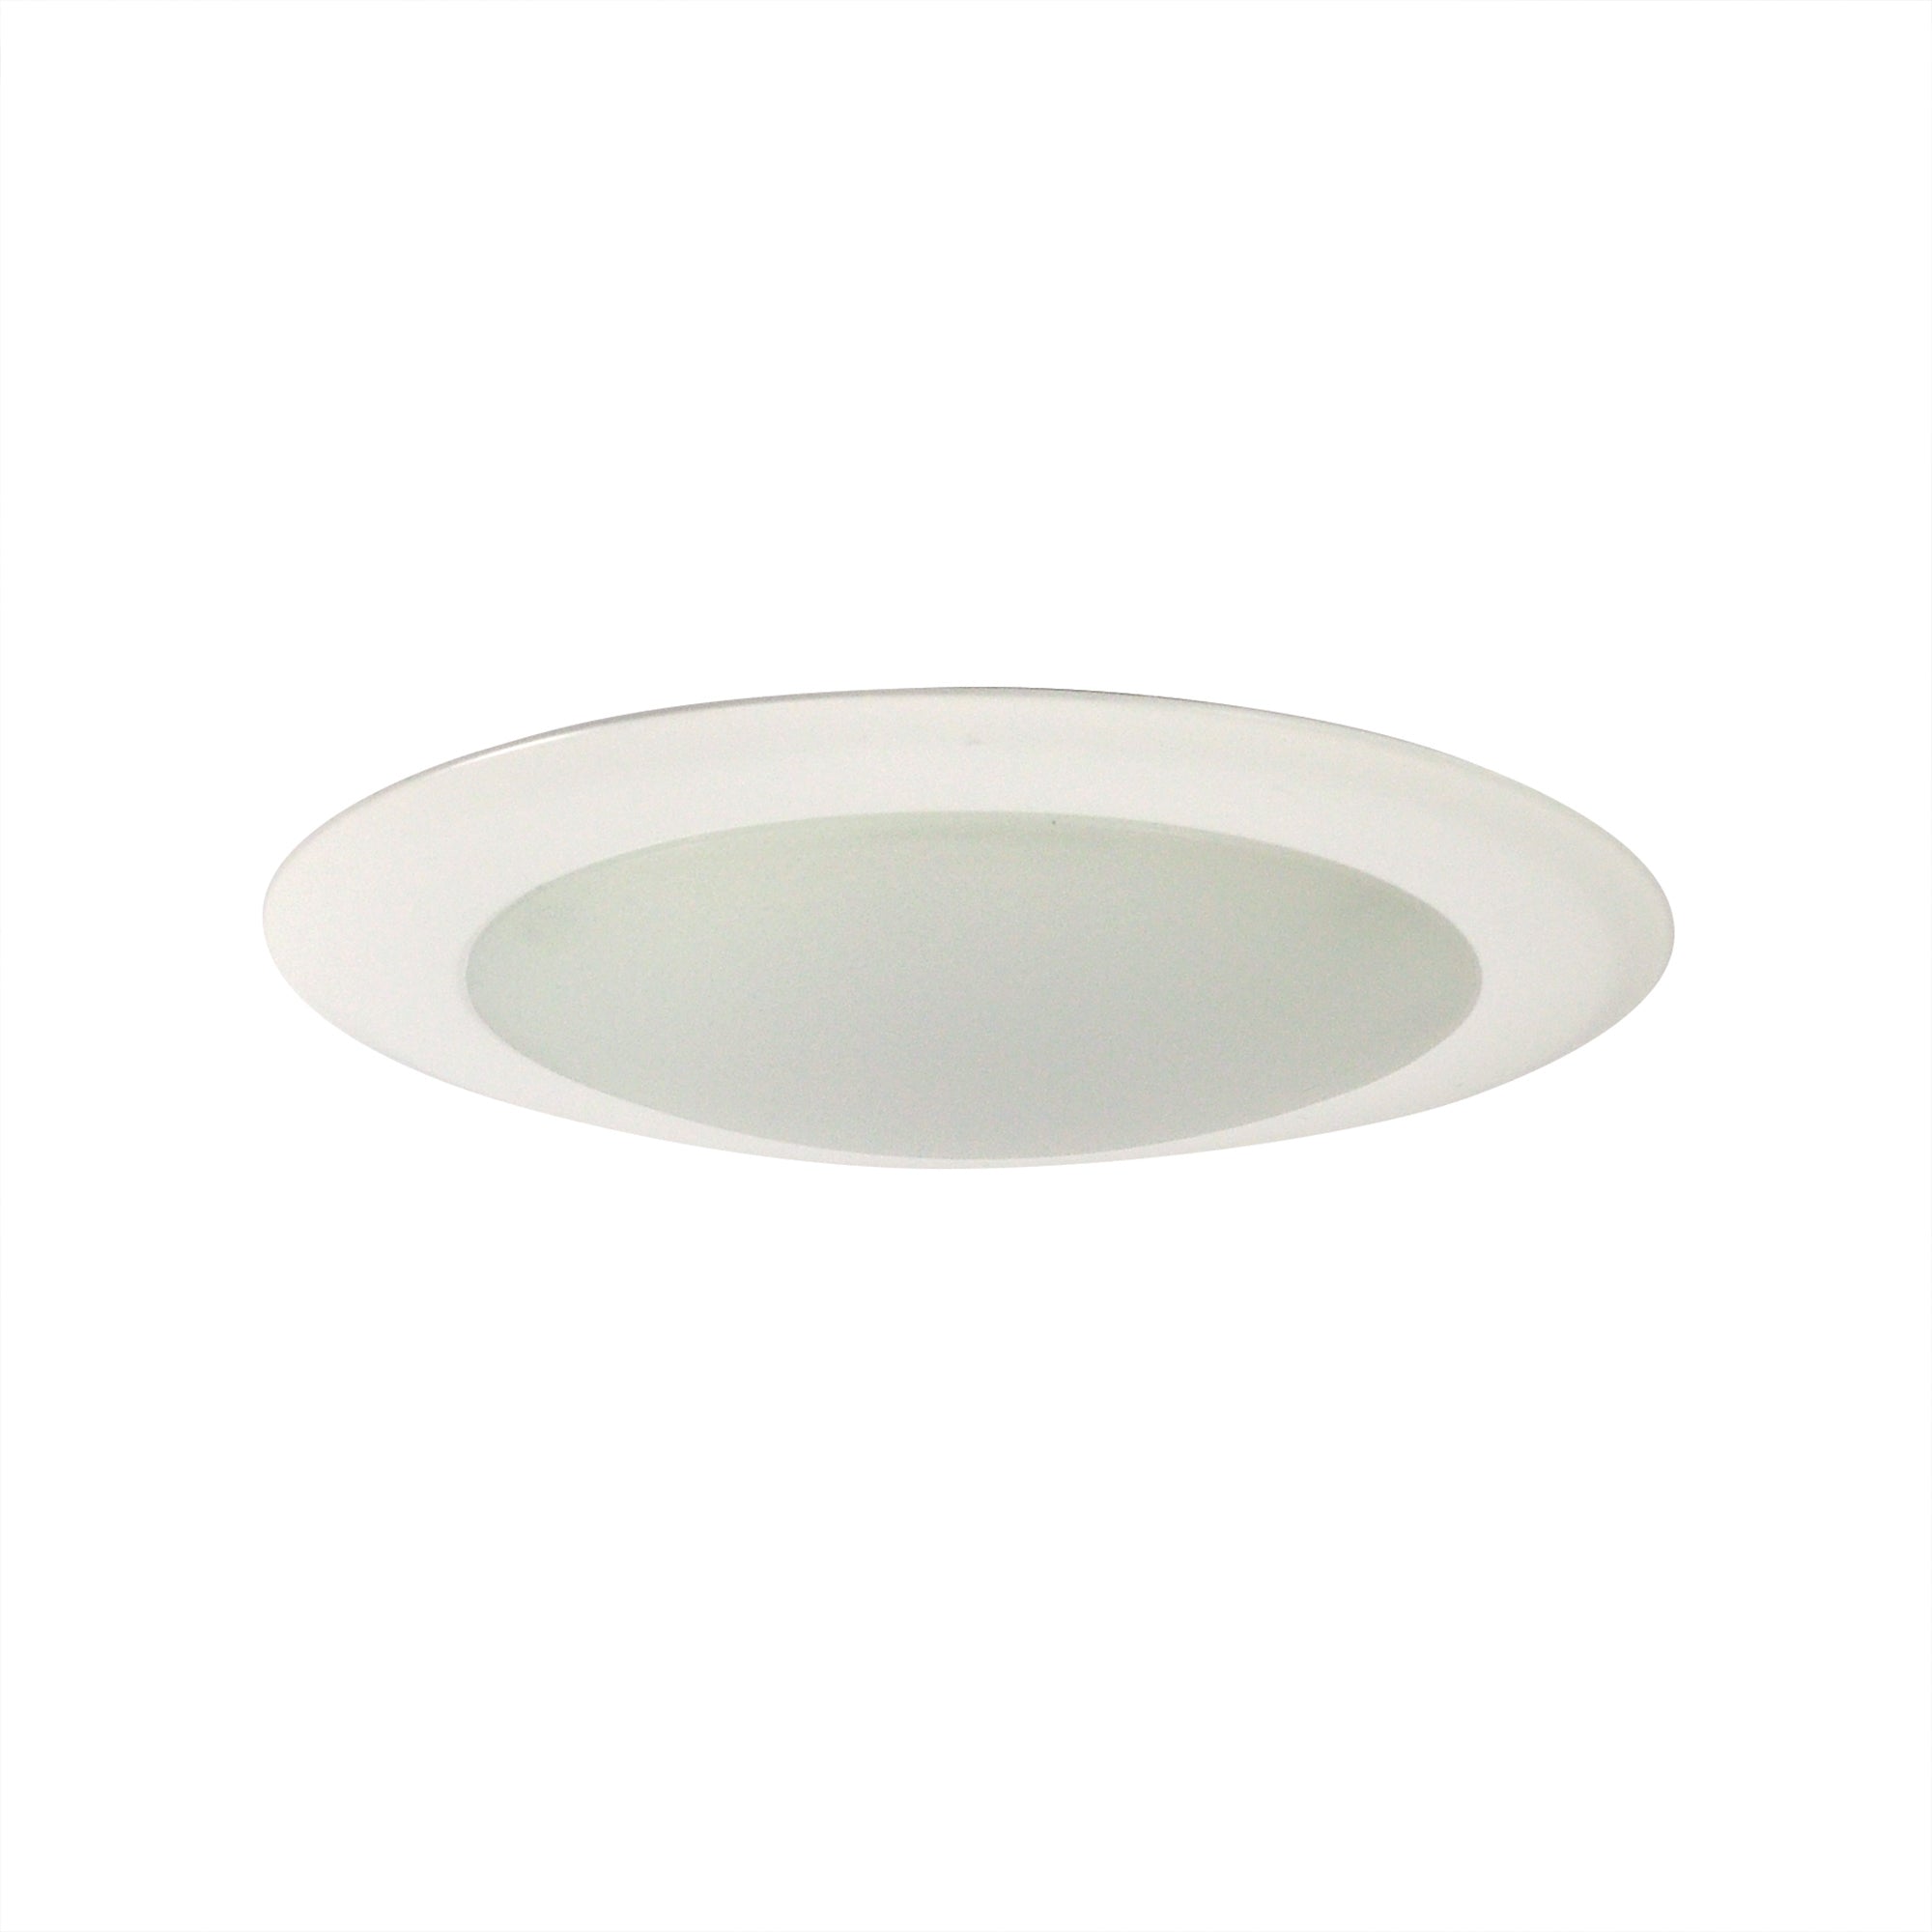 Nora Lighting NLOPAC-R6509T2430W - Surface - 6 Inch AC Opal LED Surface Mount, 1150lm / 16.5W, 3000K, White finish